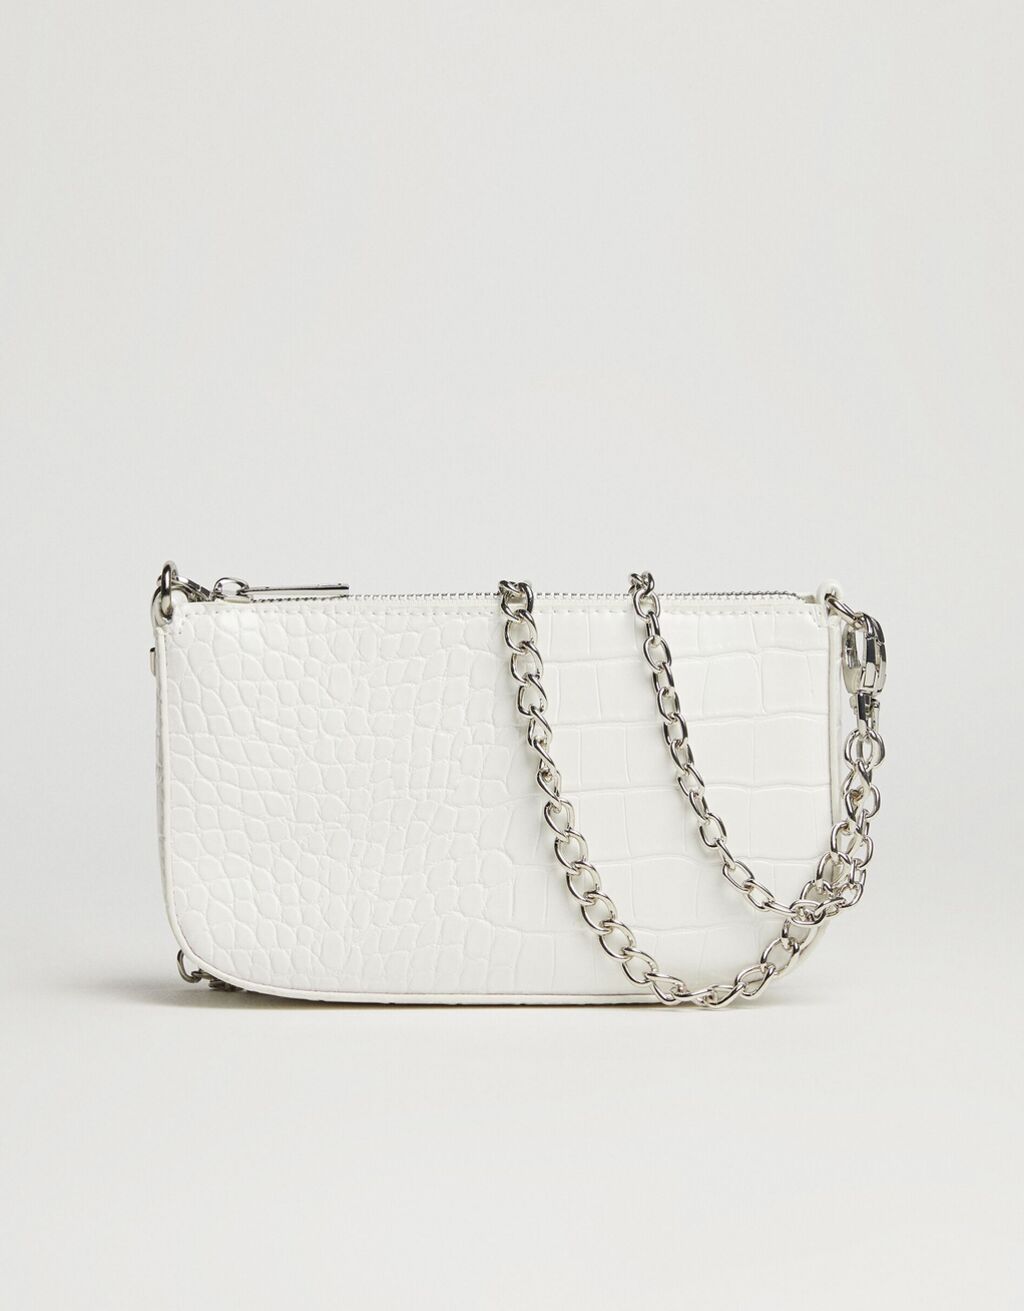 Mock croc bag with chain detail